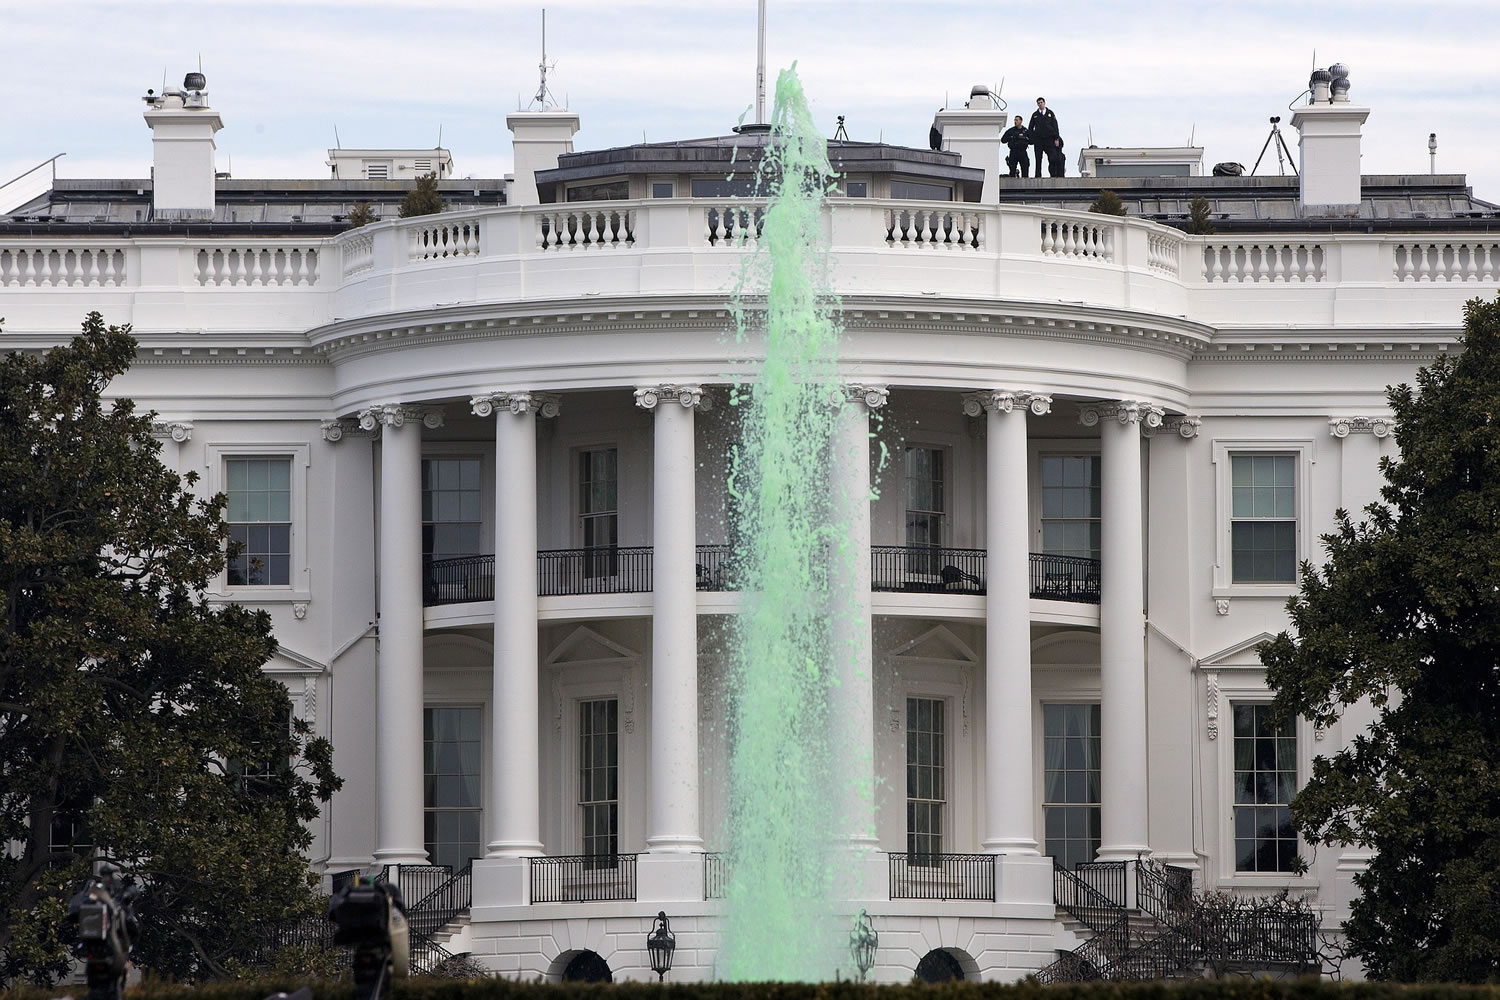 Members of the Secret Service patrol the top of the White House in Washington on Tuesday as a fountain has been dyed green for St.